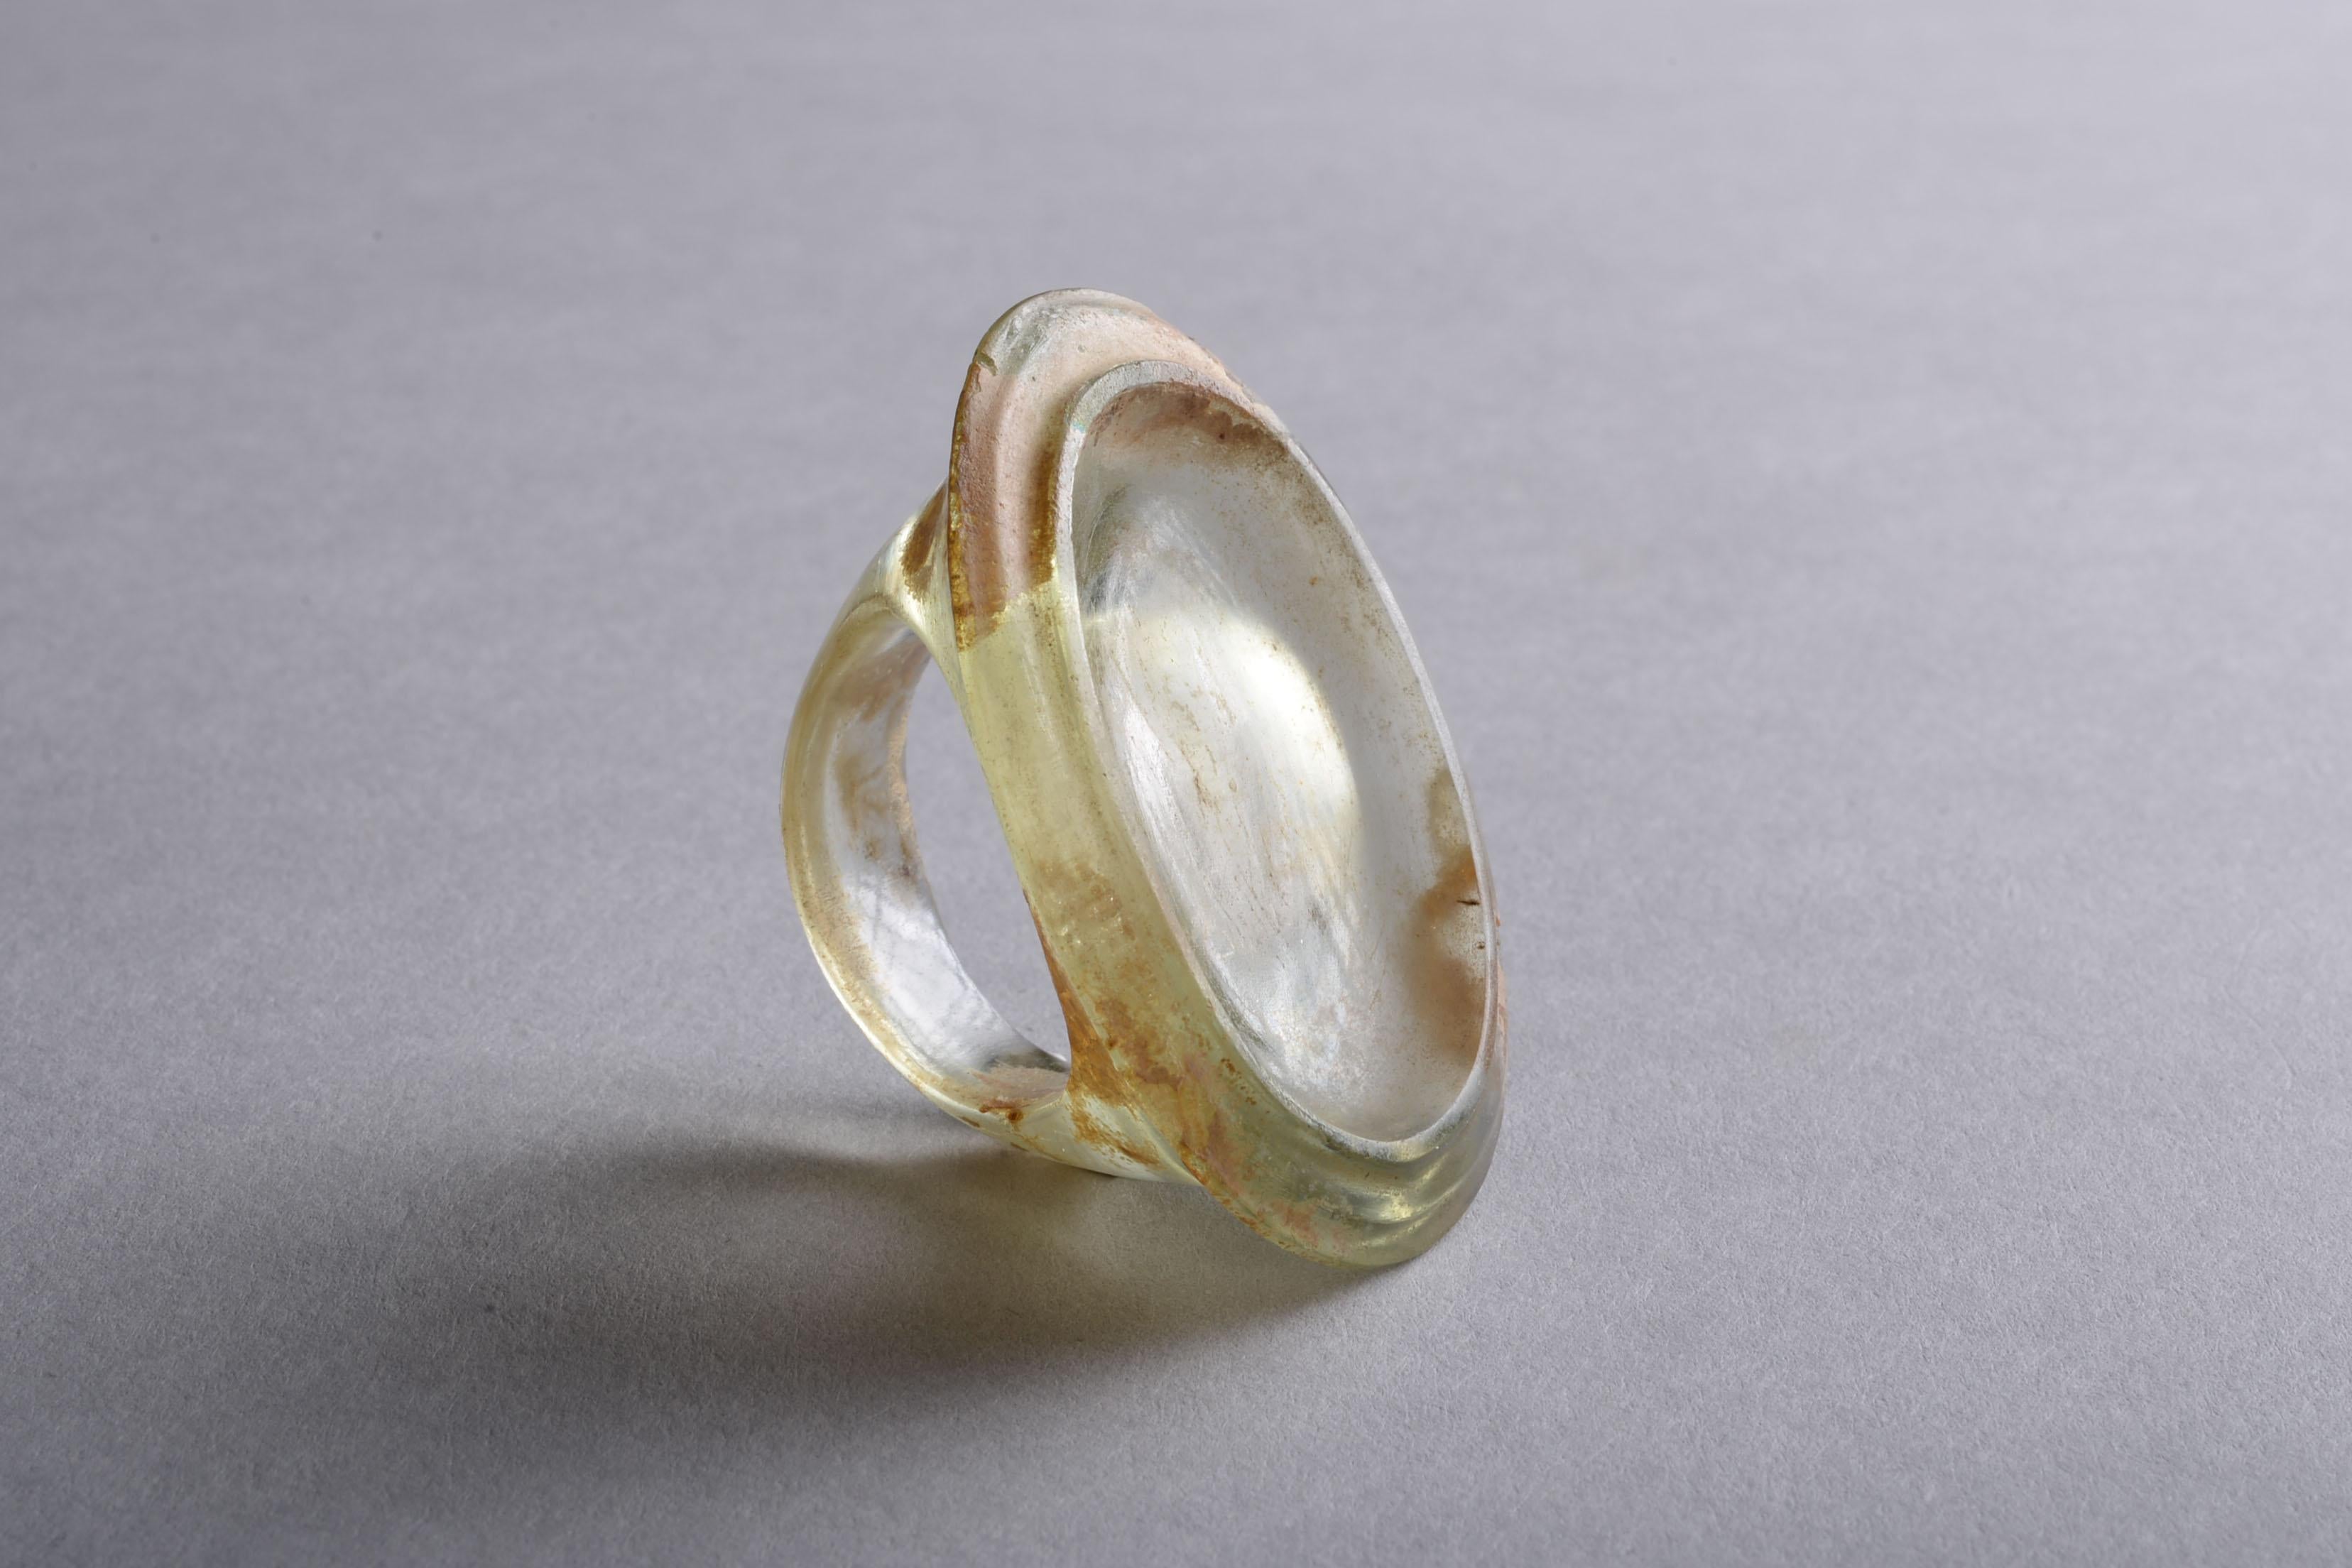 This beautifully preserved ring was cast from light green transparent glass. Its large size and shape are typical of Hellenistic finger rings, and its now empty oval bezel would originally have been decorated.

Jewellery was produced in abundance